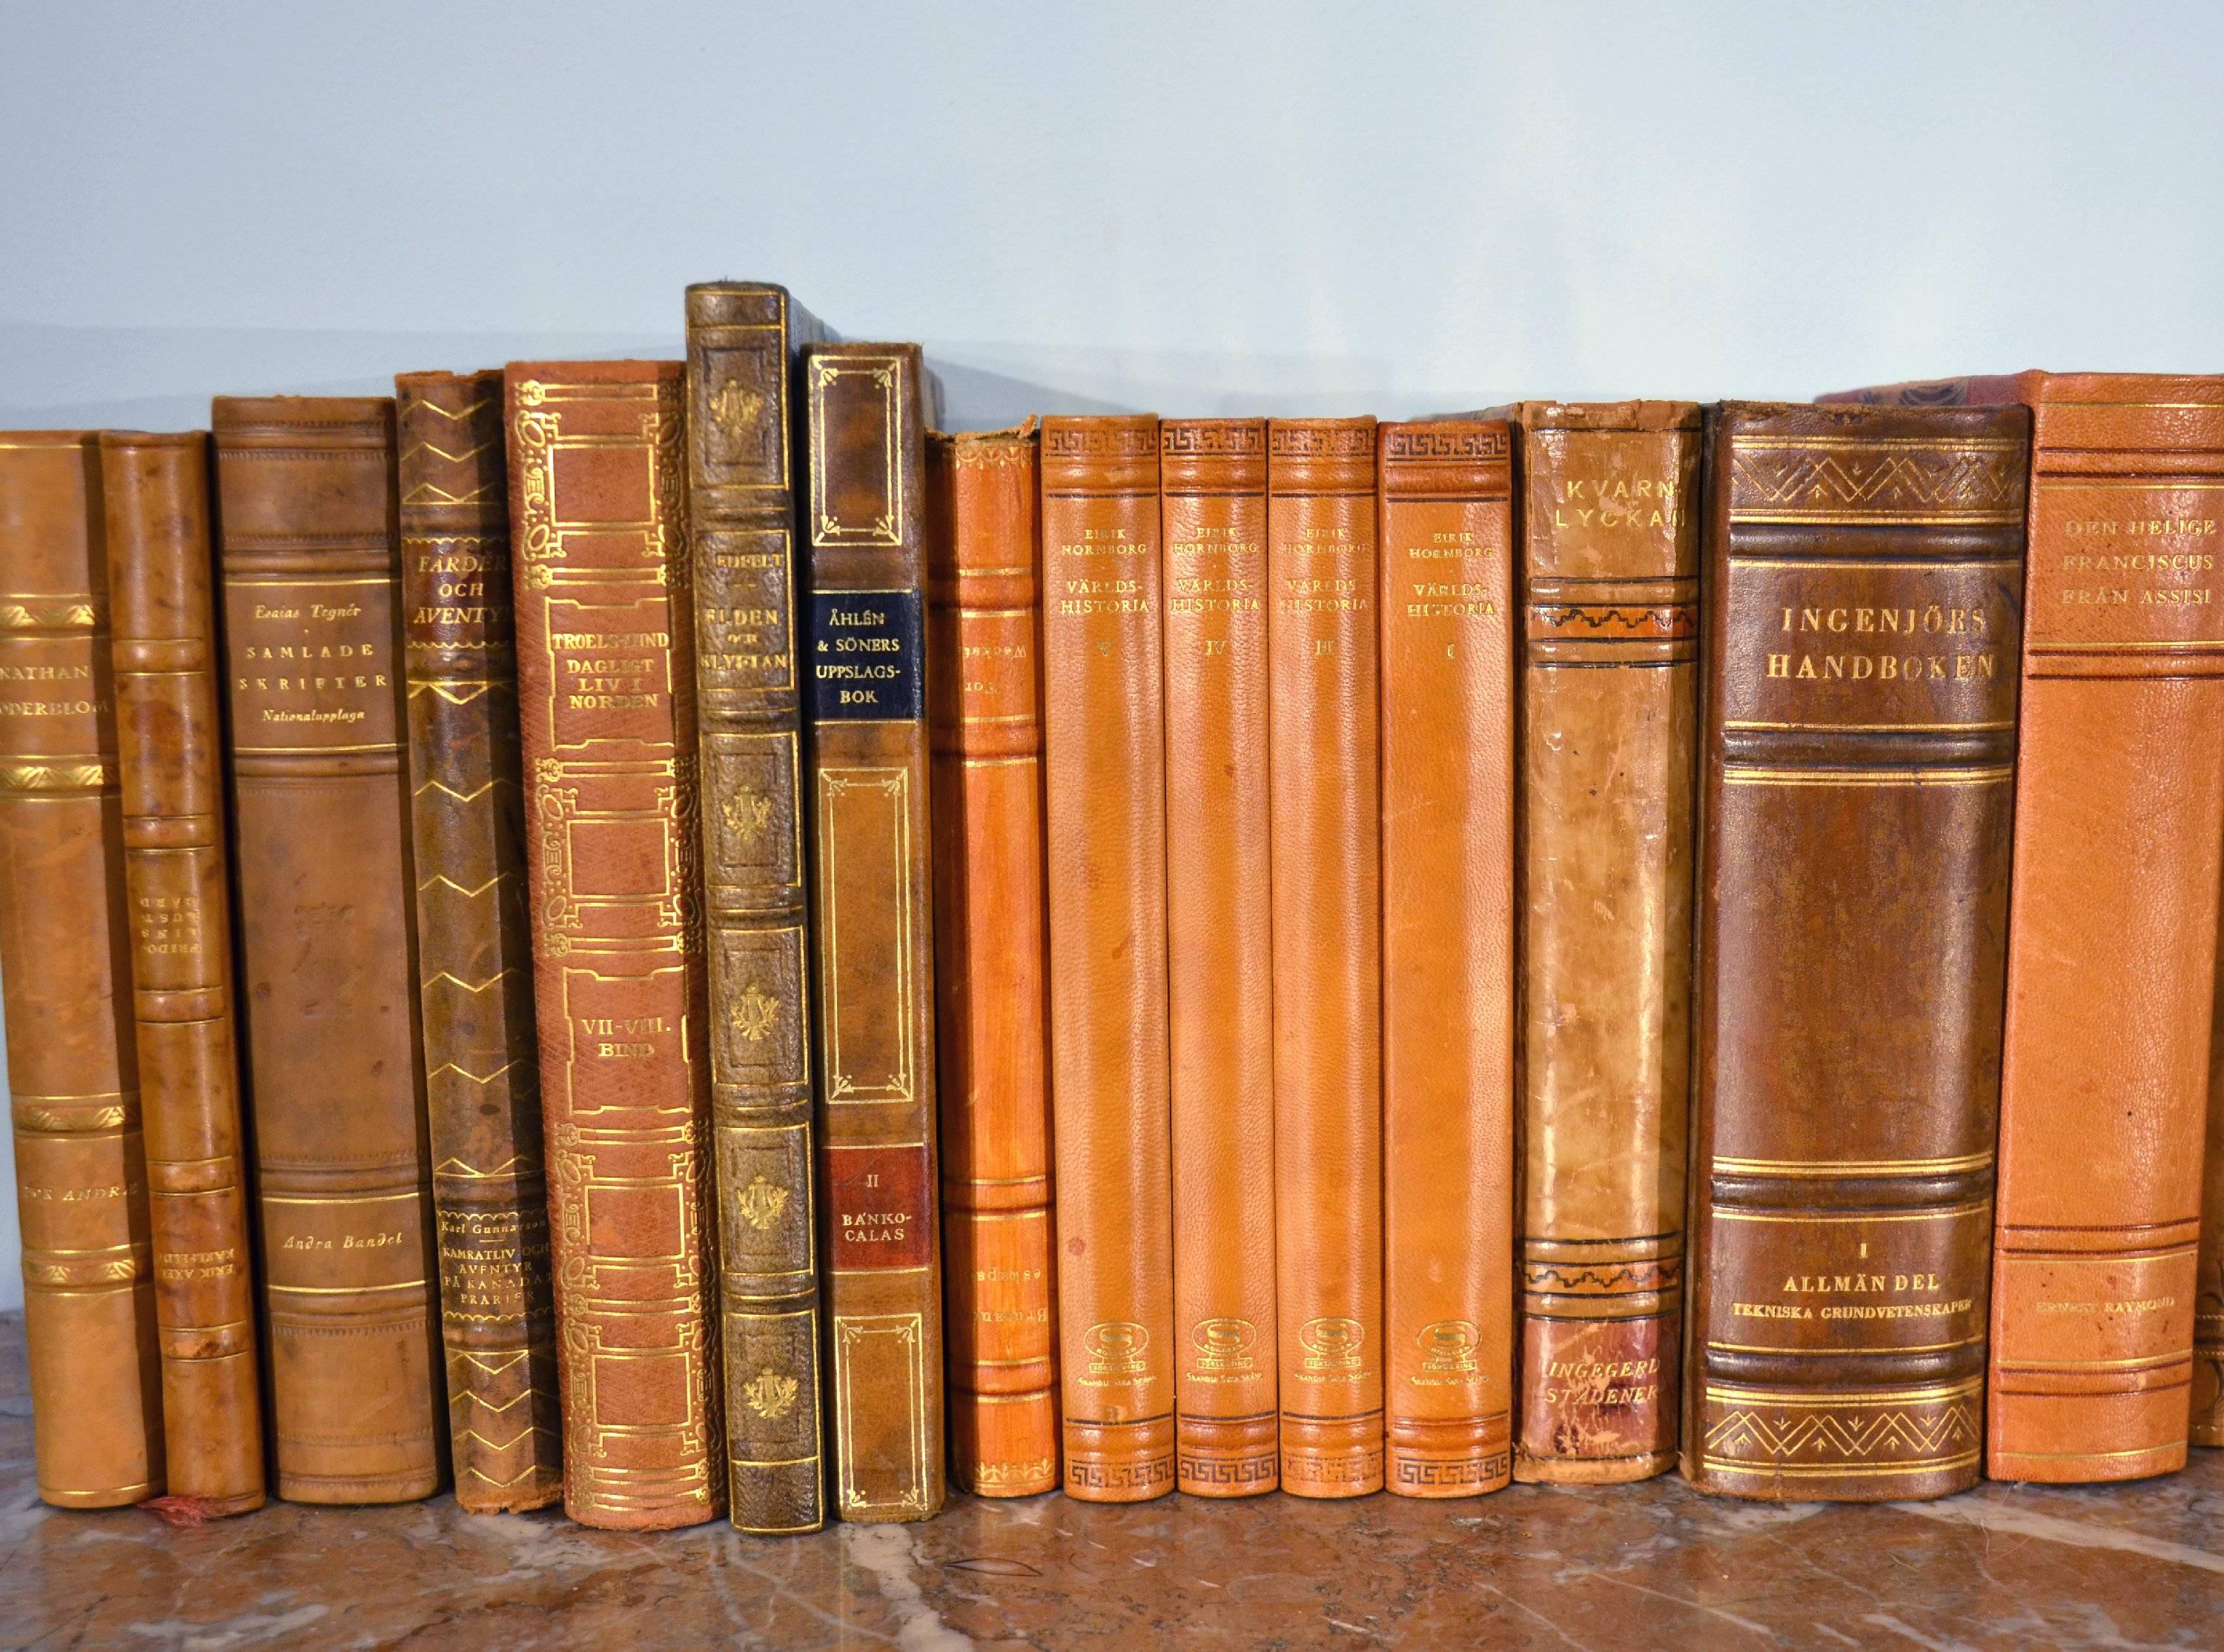 This large and very attractive collection of beautiful leather-bound Swedish Literature books contains 46 books in total, in warm rich tones of dark reddish tan, brown and old gold with gold leaf embossing. Aside from a few books that have minor